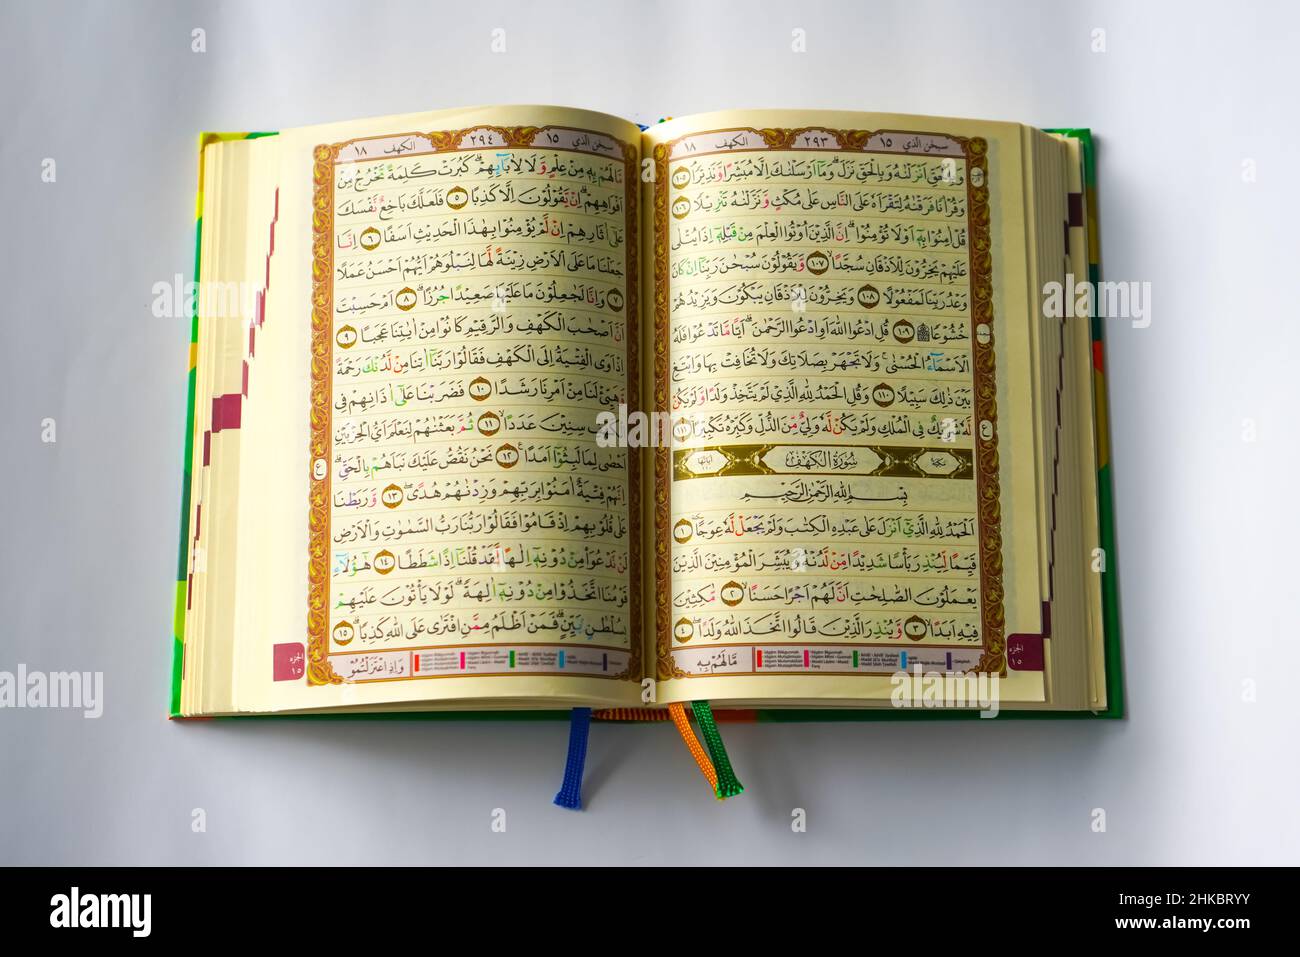 The Quran, also romanized Qur'an or Koran, is the central religious text of Islam, believed by Muslims to be a revelation from God (Allah). Stock Photo